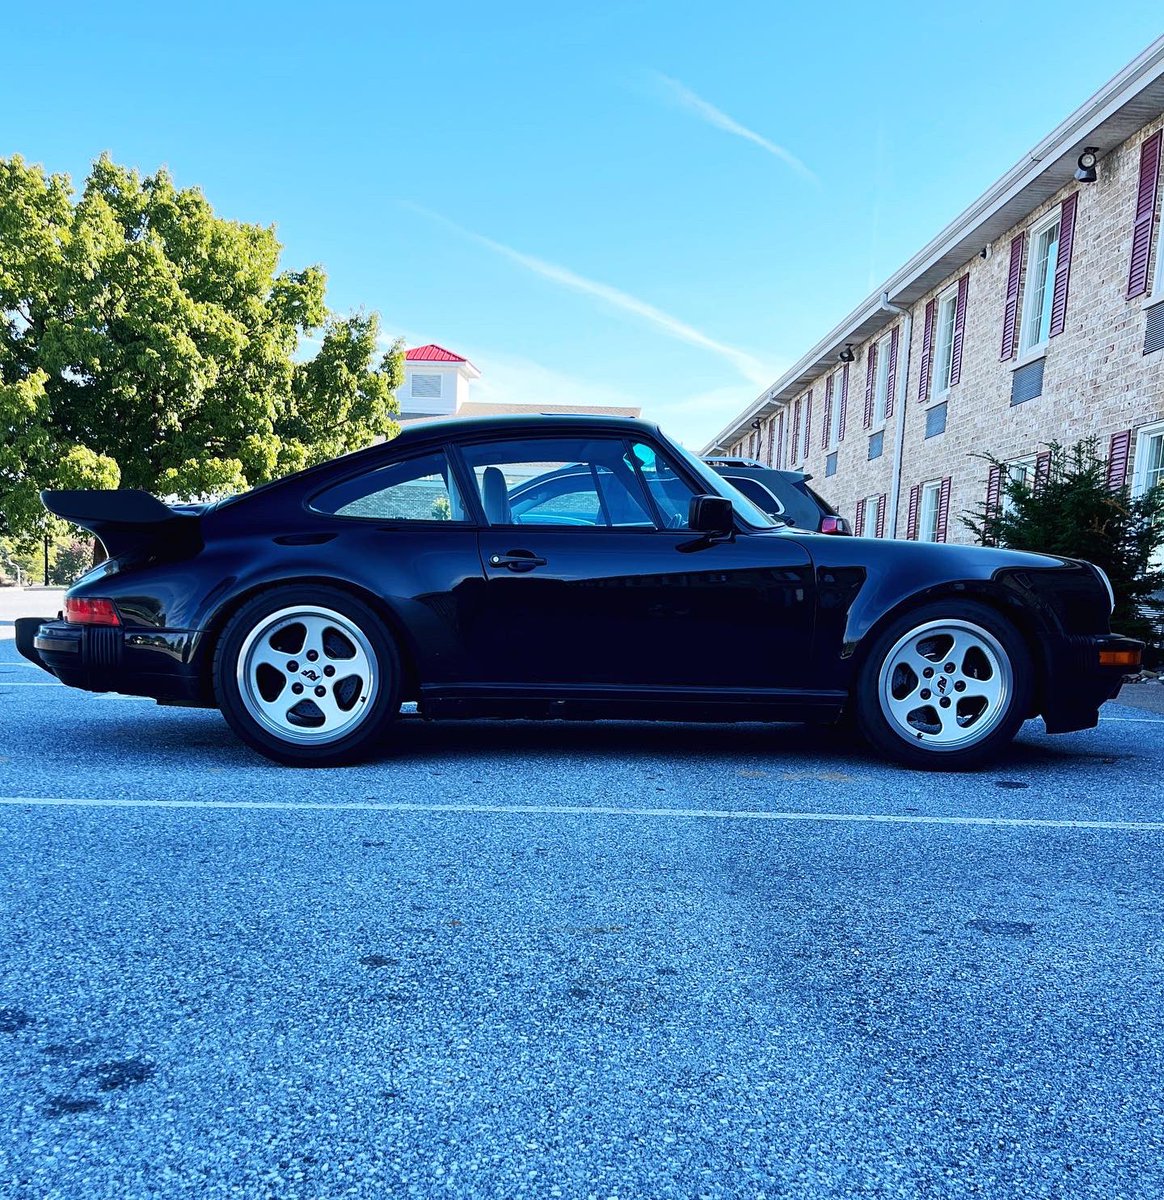 For the full post click here: instagram.com/p/CnK1vHOJMl2/…

Have a look at this unbelievable looking 1987 Porsche 911 Turbo Coupe, finished in a beautiful black on gray leather specification!

#classiccars #likes #artwork #carshows #artcar #911turbo #art #porsche911turbo